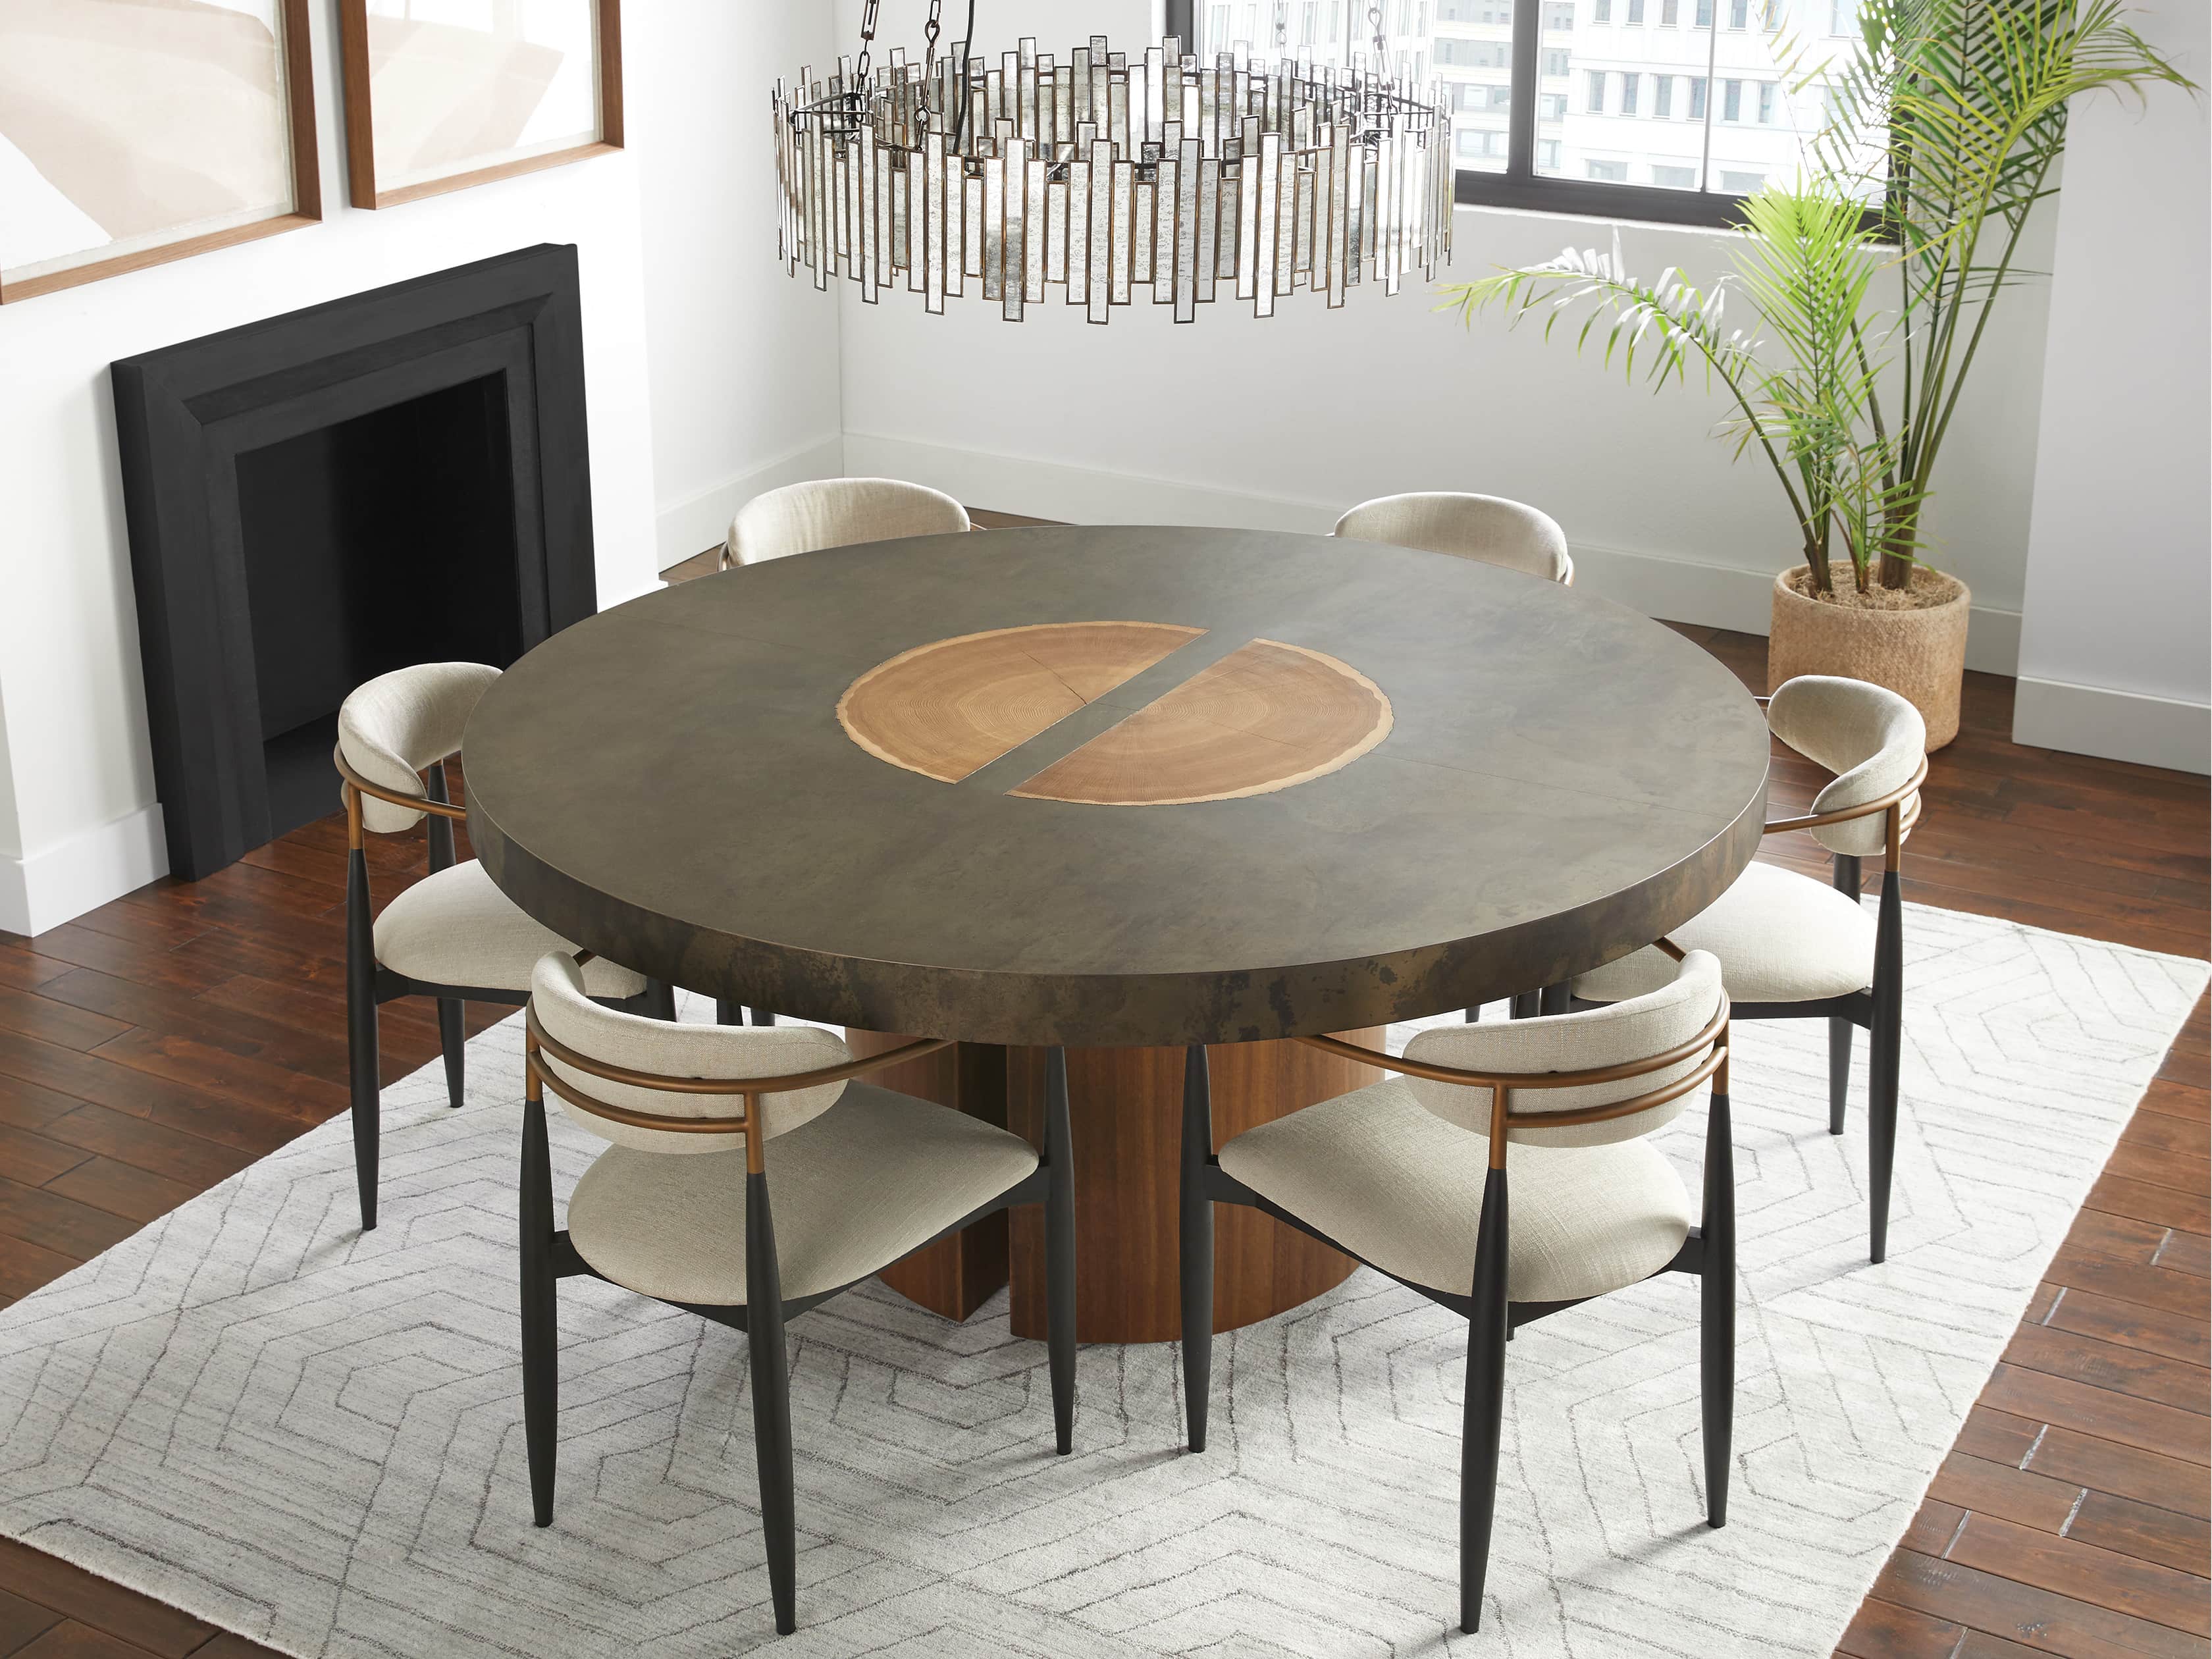 Milo Handwoven Rug Arhaus, What Size Rug Do You Put Under A 60 Round Table